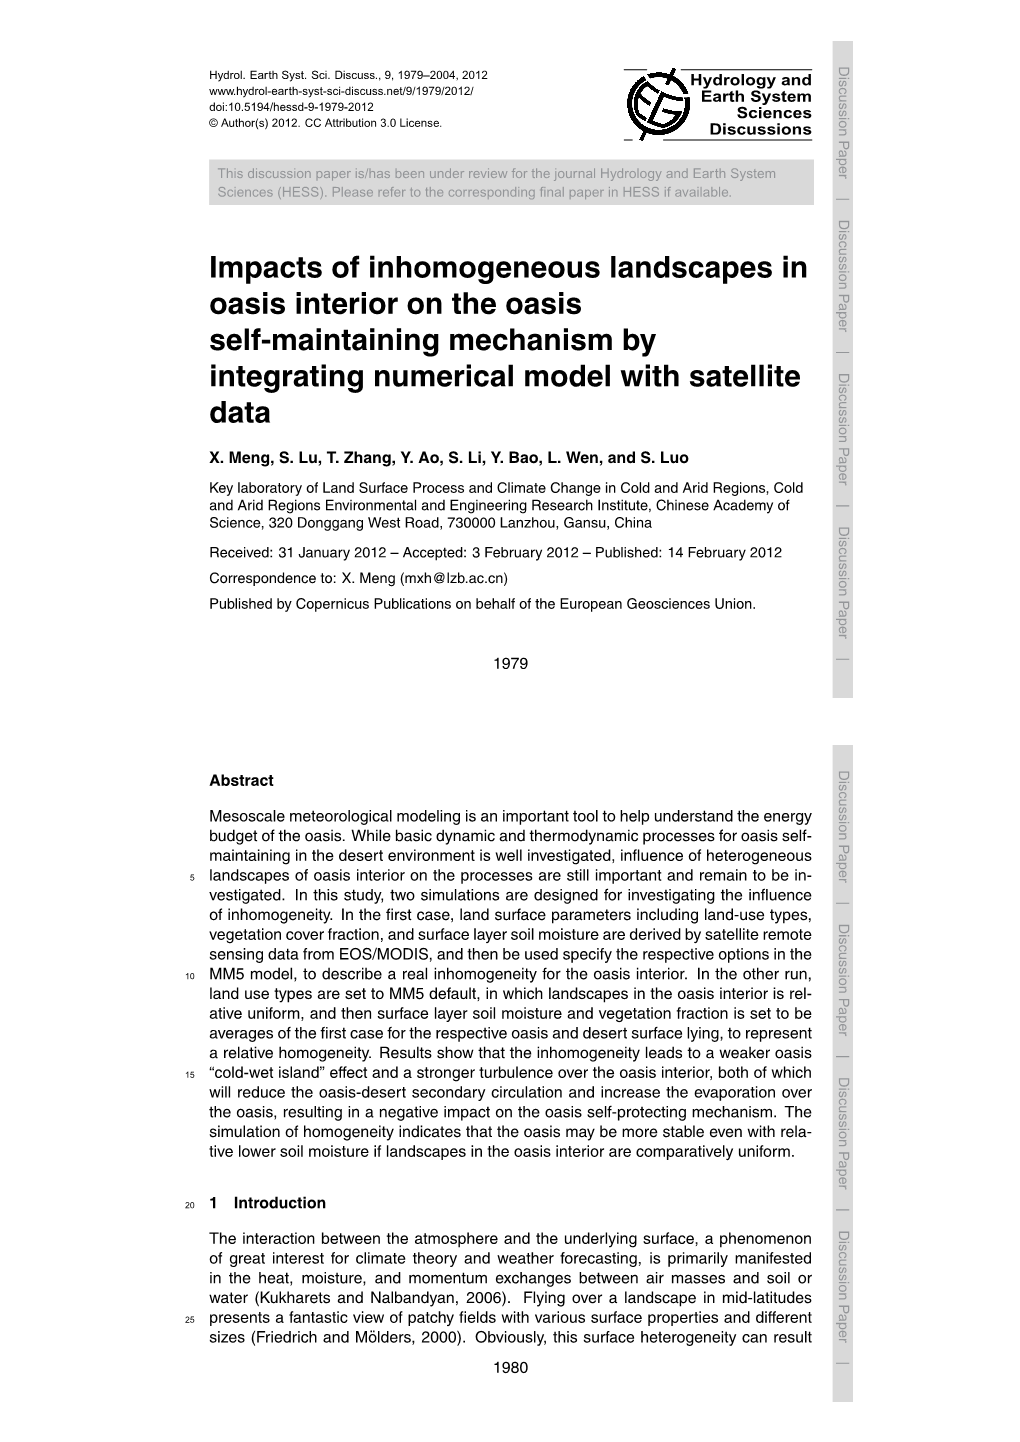 Impacts of Inhomogeneous Landscapes in Oasis Interior on the Oasis Self-Maintaining Mechanism by Integrating Numerical Model with Satellite Data X